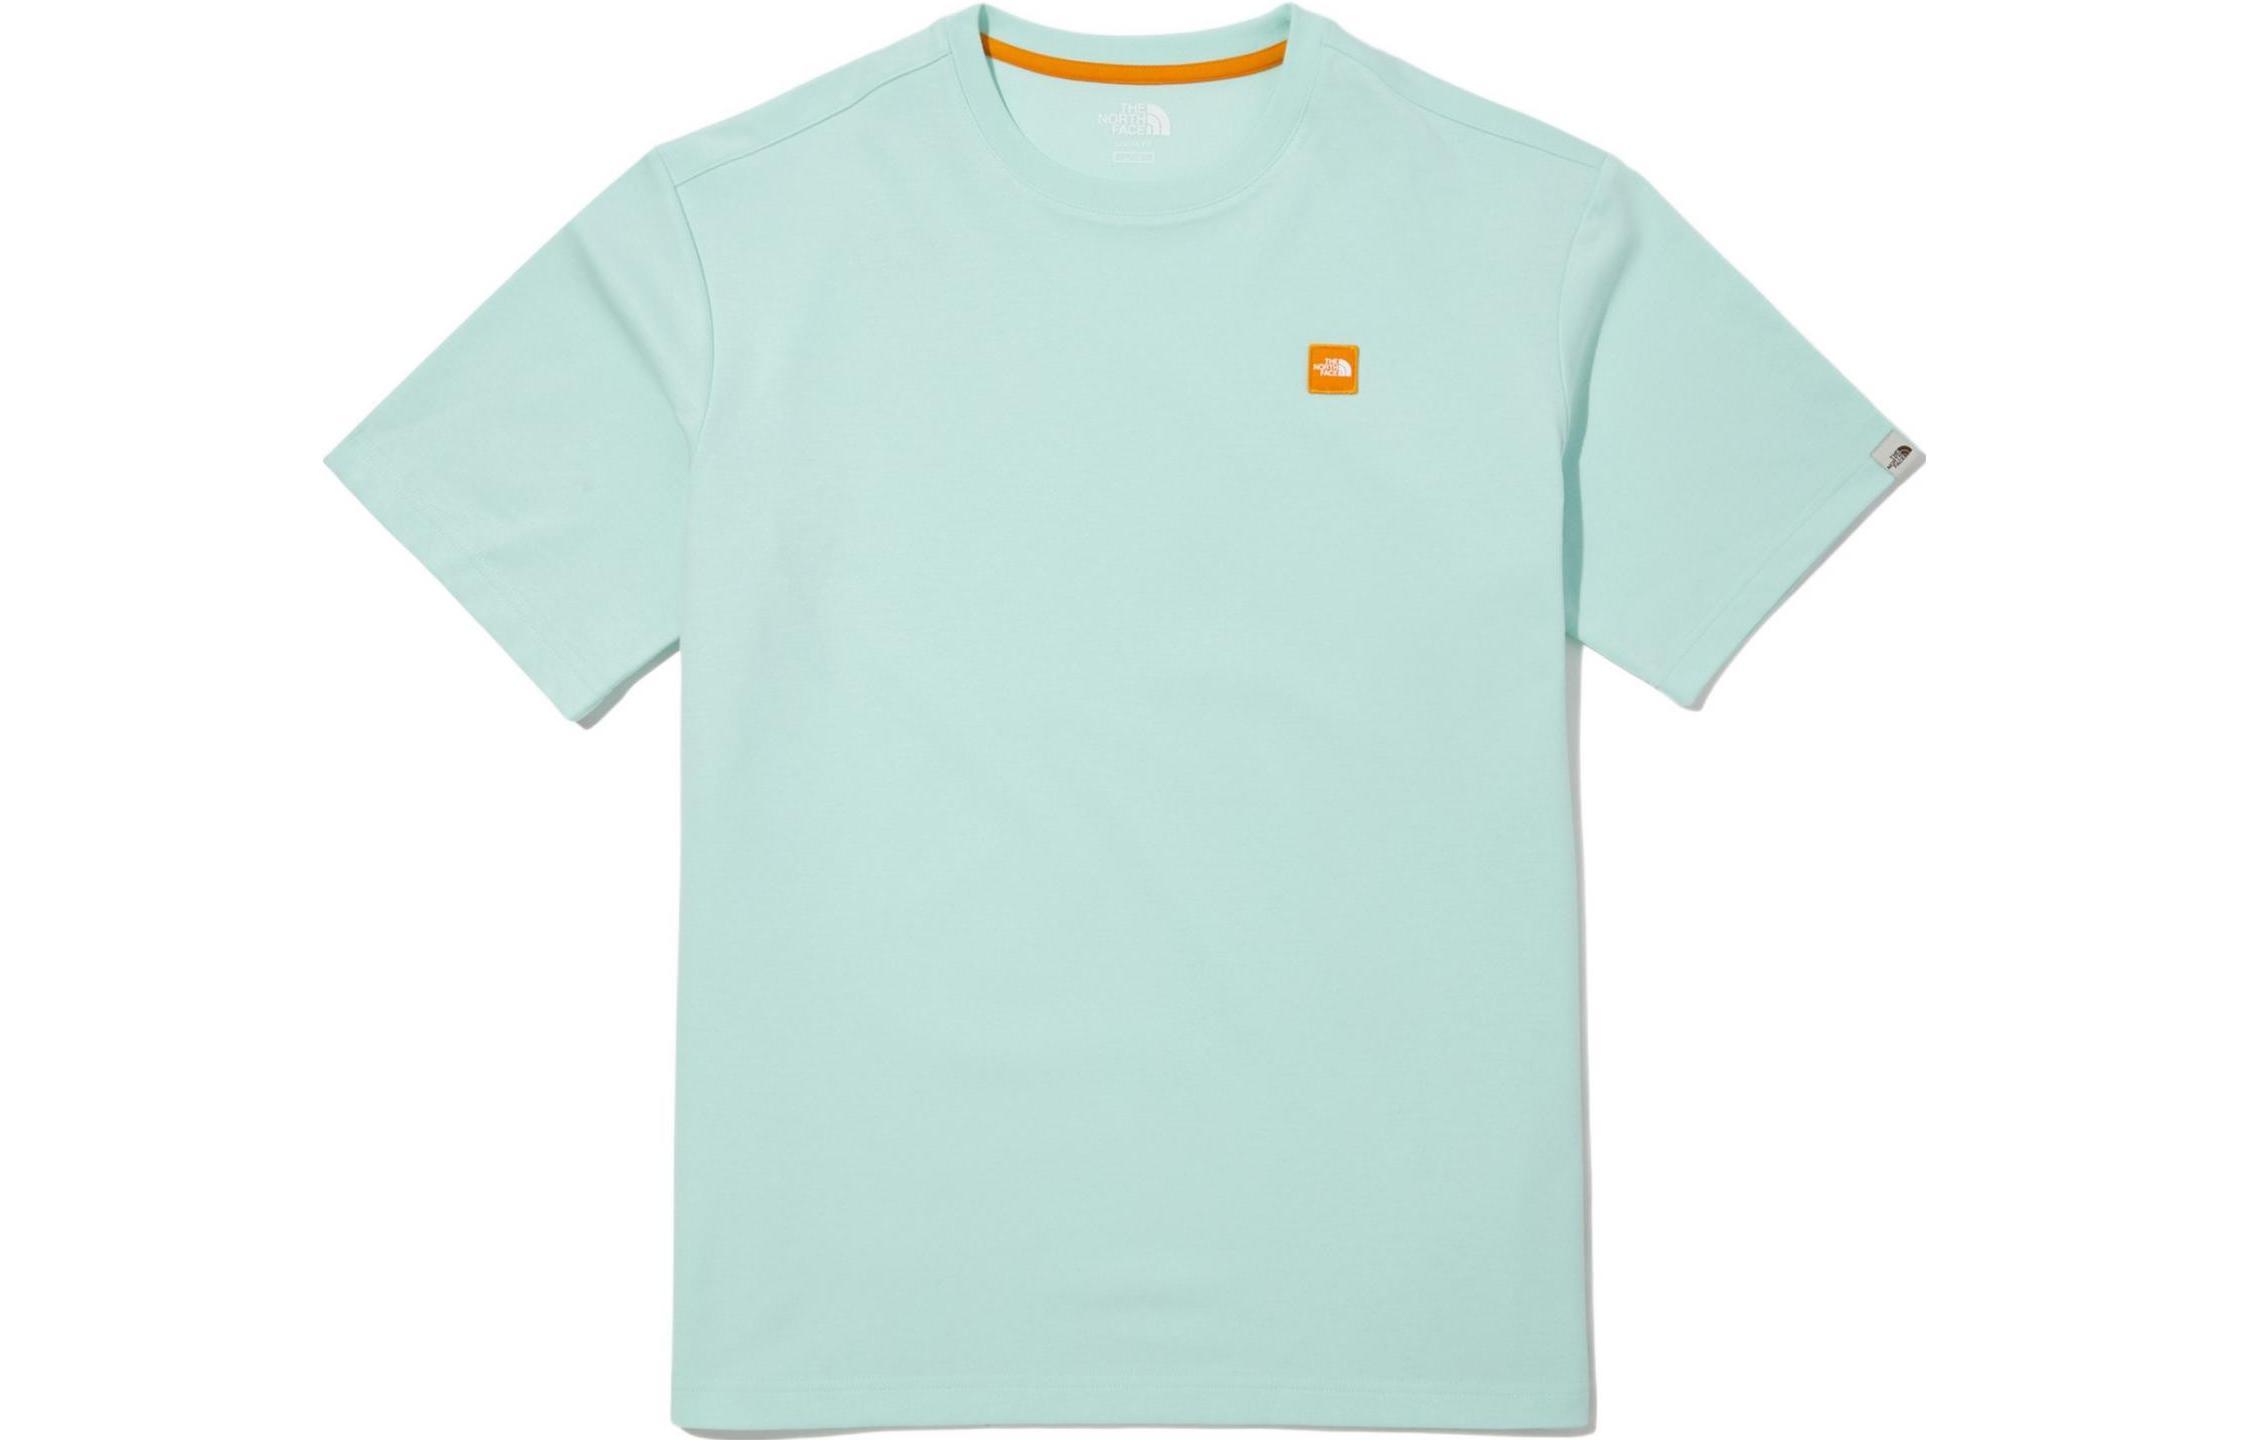 THE NORTH FACE SS22 LogoT